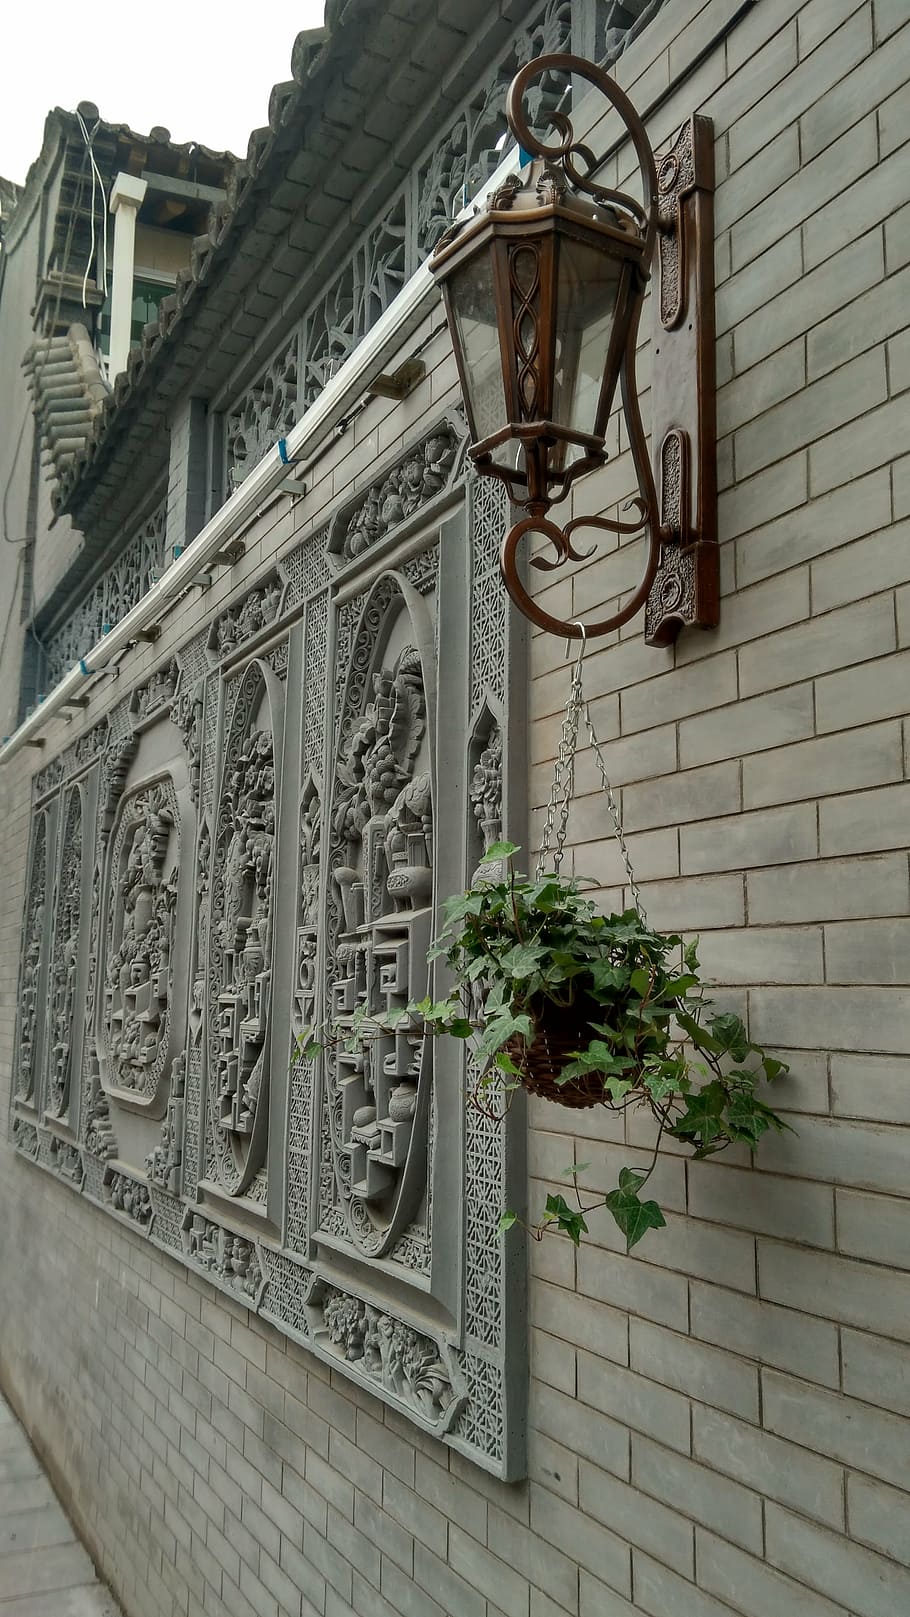 ancient architecture, wall sconce, brick wall, green plants, building exterior, architecture, built structure, low angle view, building, day